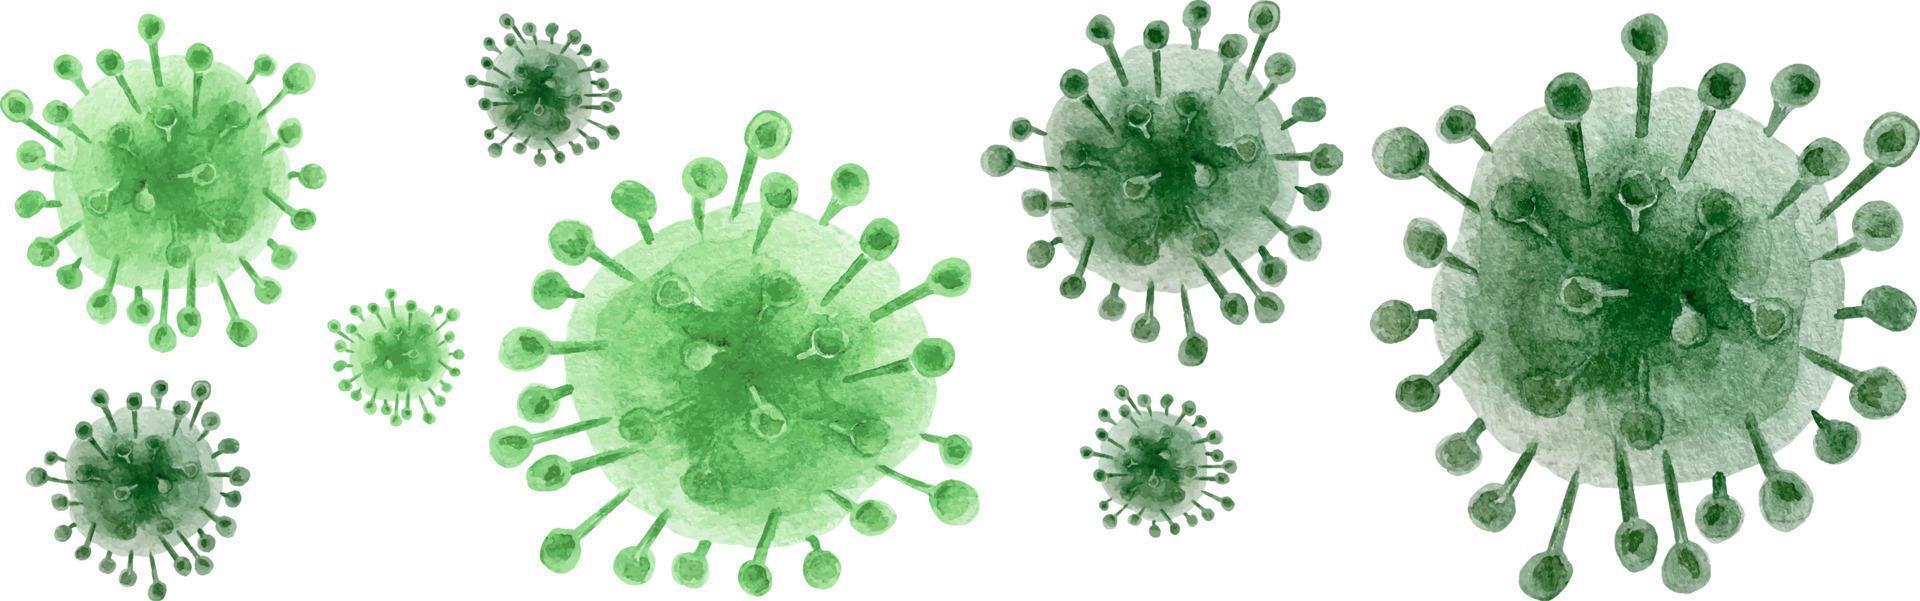 Watercolor coronavirus cell. A set of three stylized images of viruses. Green virus with spots and strokes. vector